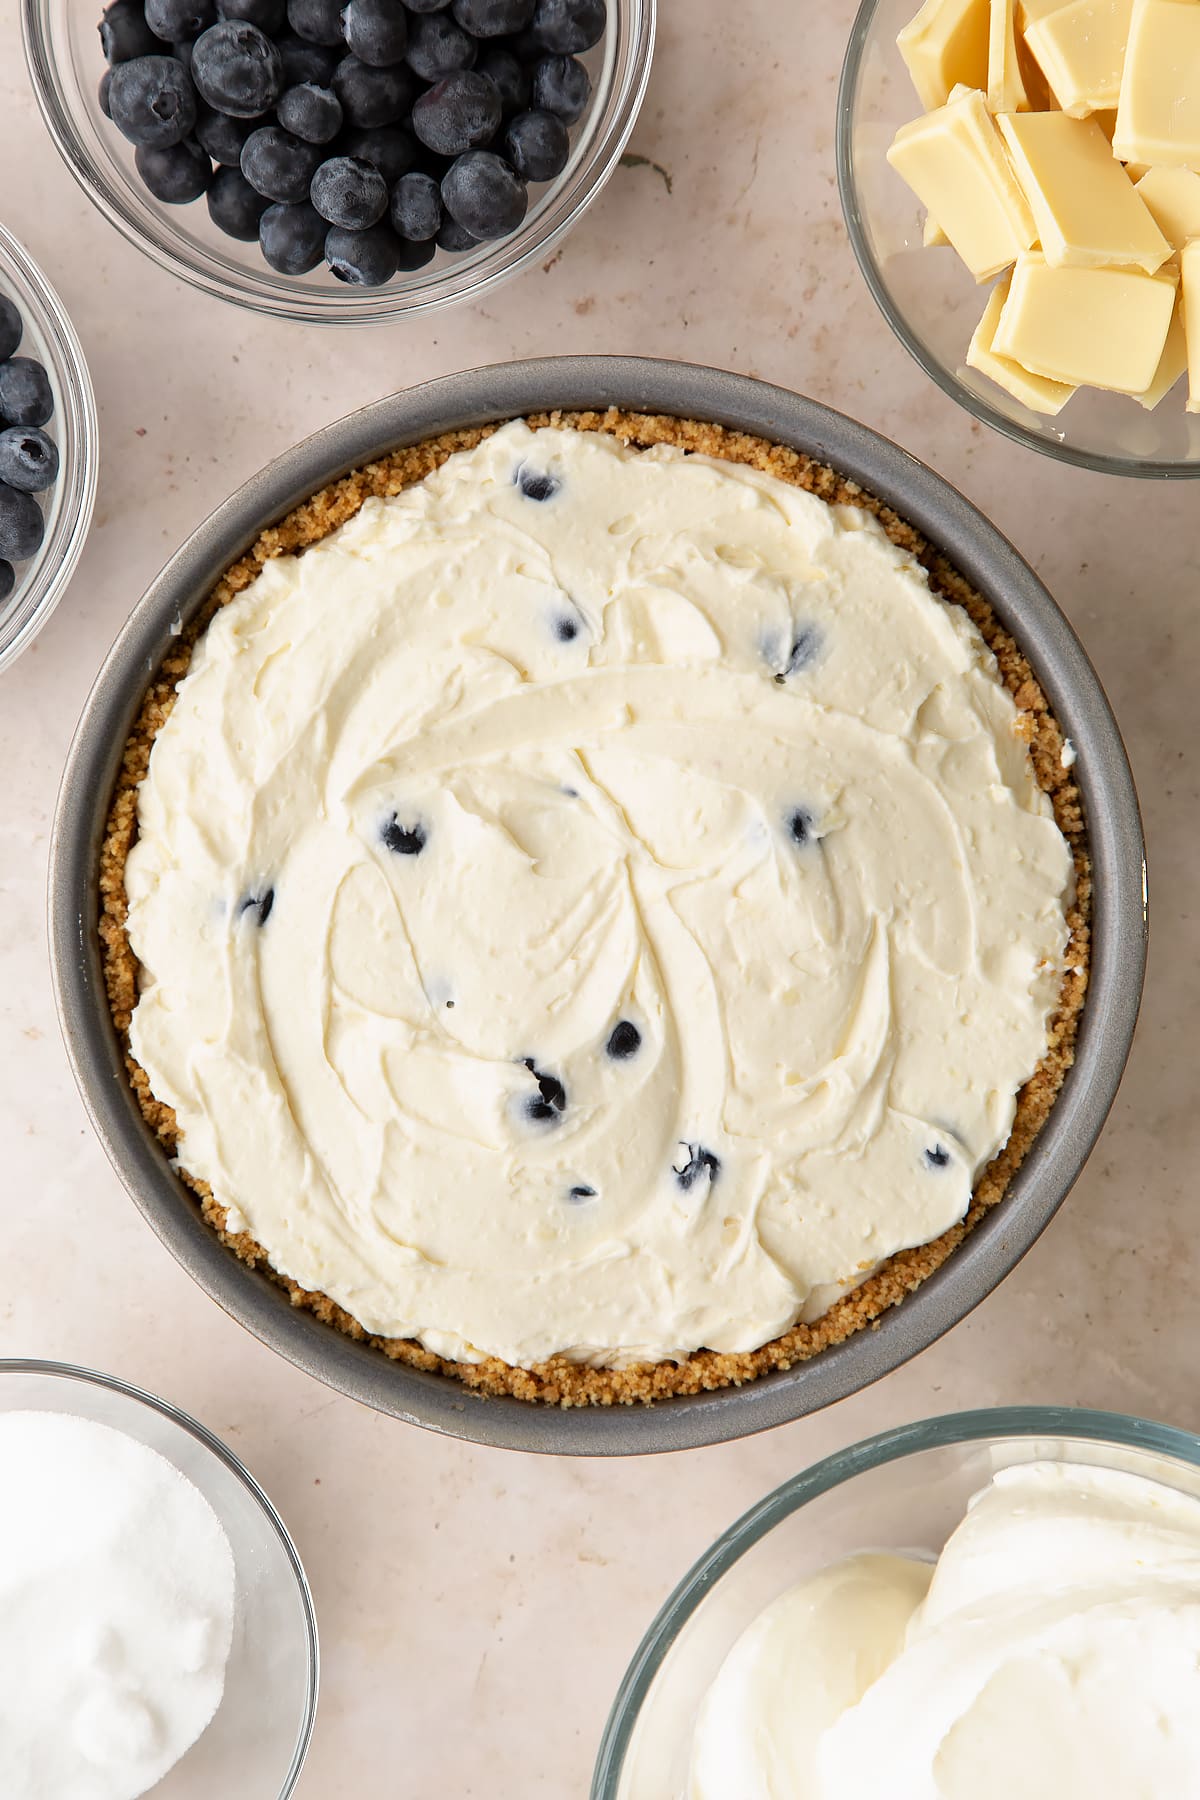 Blueberry cheesecake pie in a tin, shown from above.